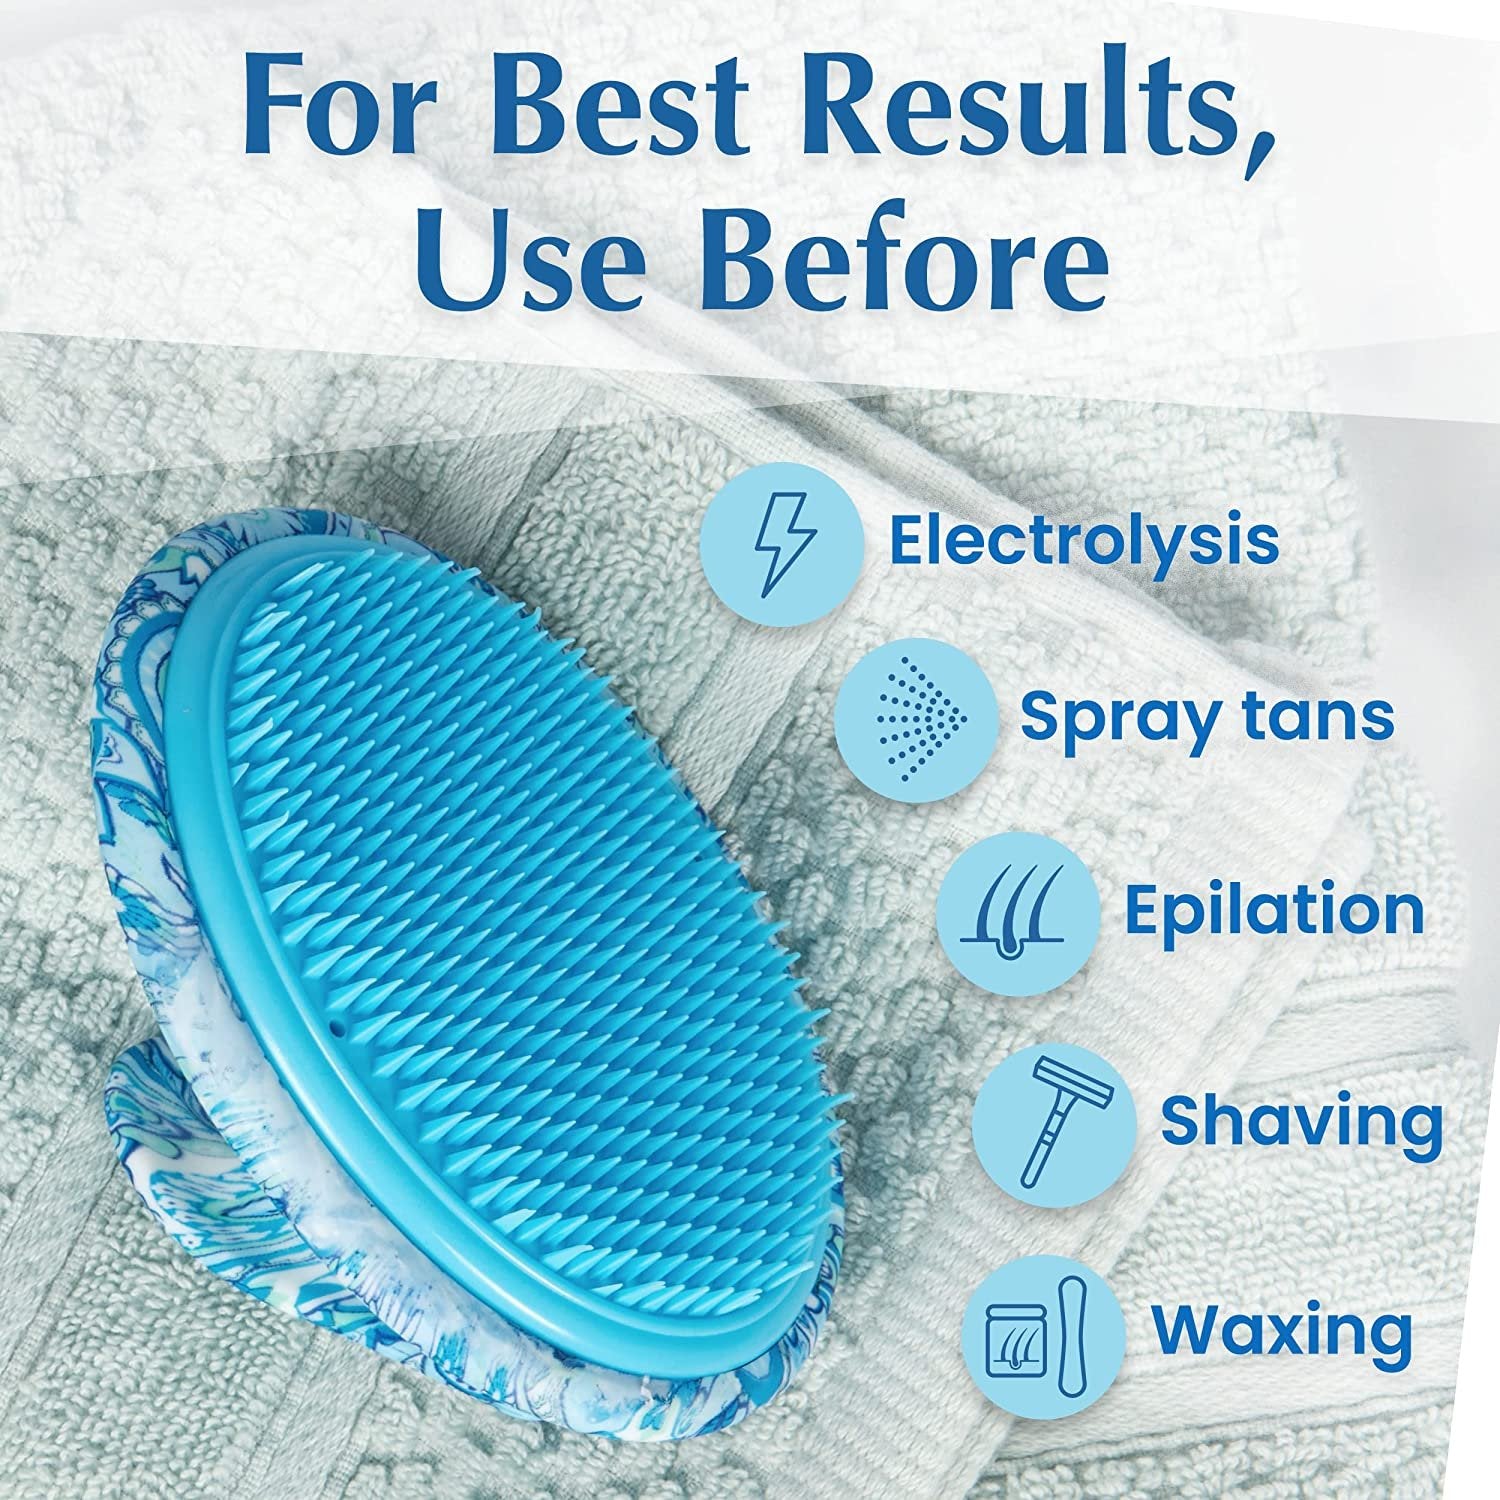 Exfoliating Brush to Treat and Prevent Razor Bumps and Ingrown Hairs - Eliminate Shaving Irritation for Legs, Armpit, Bikini Line - Silky Smooth Skin Solution for Men and Women by Dylonic